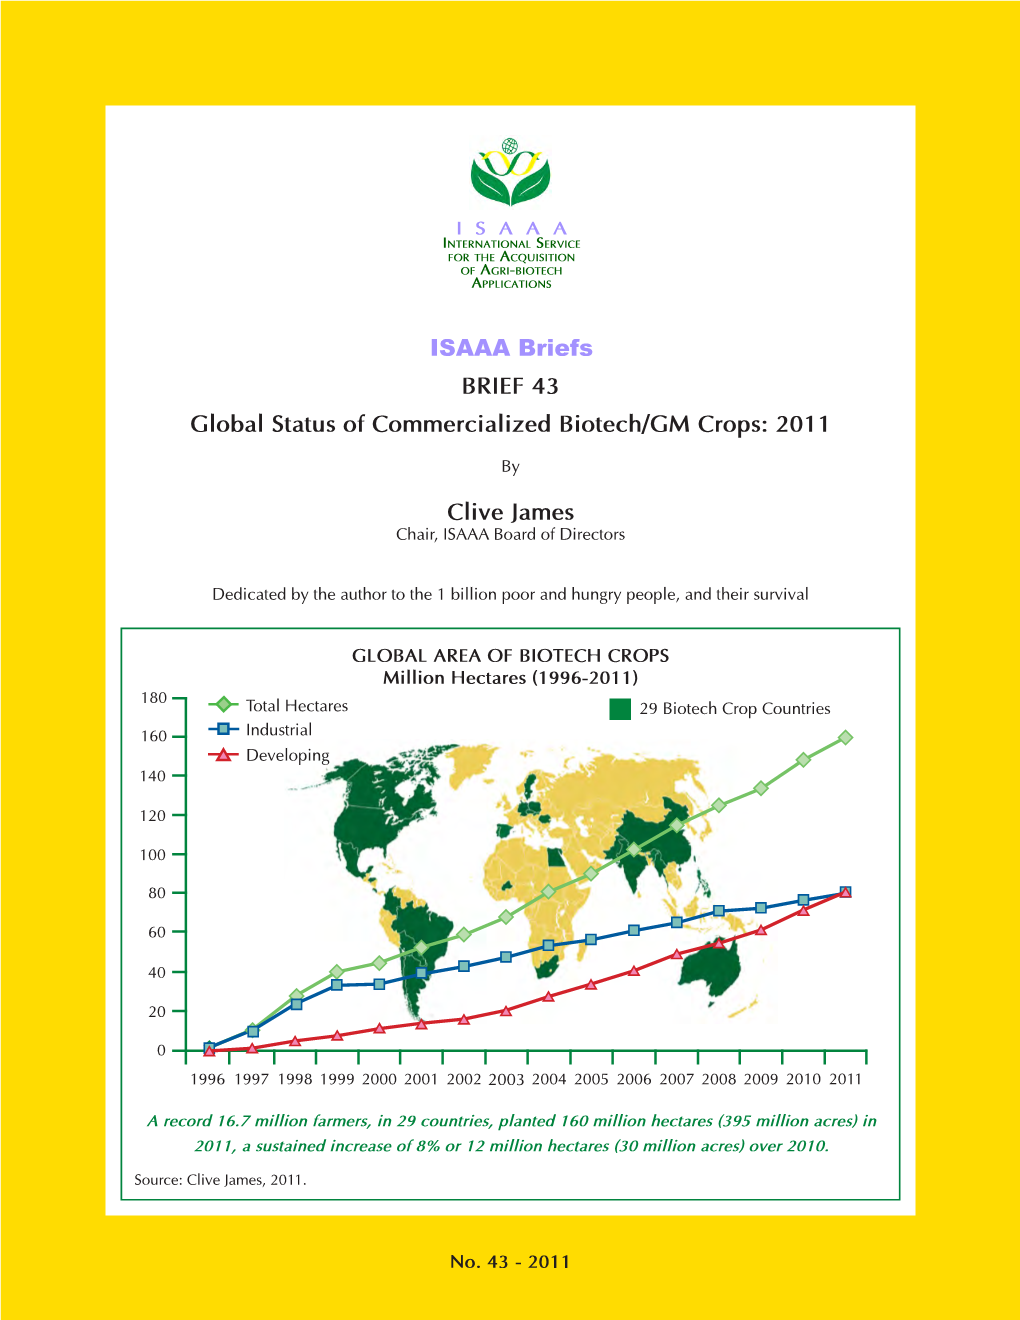 ISAAA Briefs Brief 43 Global Status of Commercialized Biotech/GM Crops: 2011